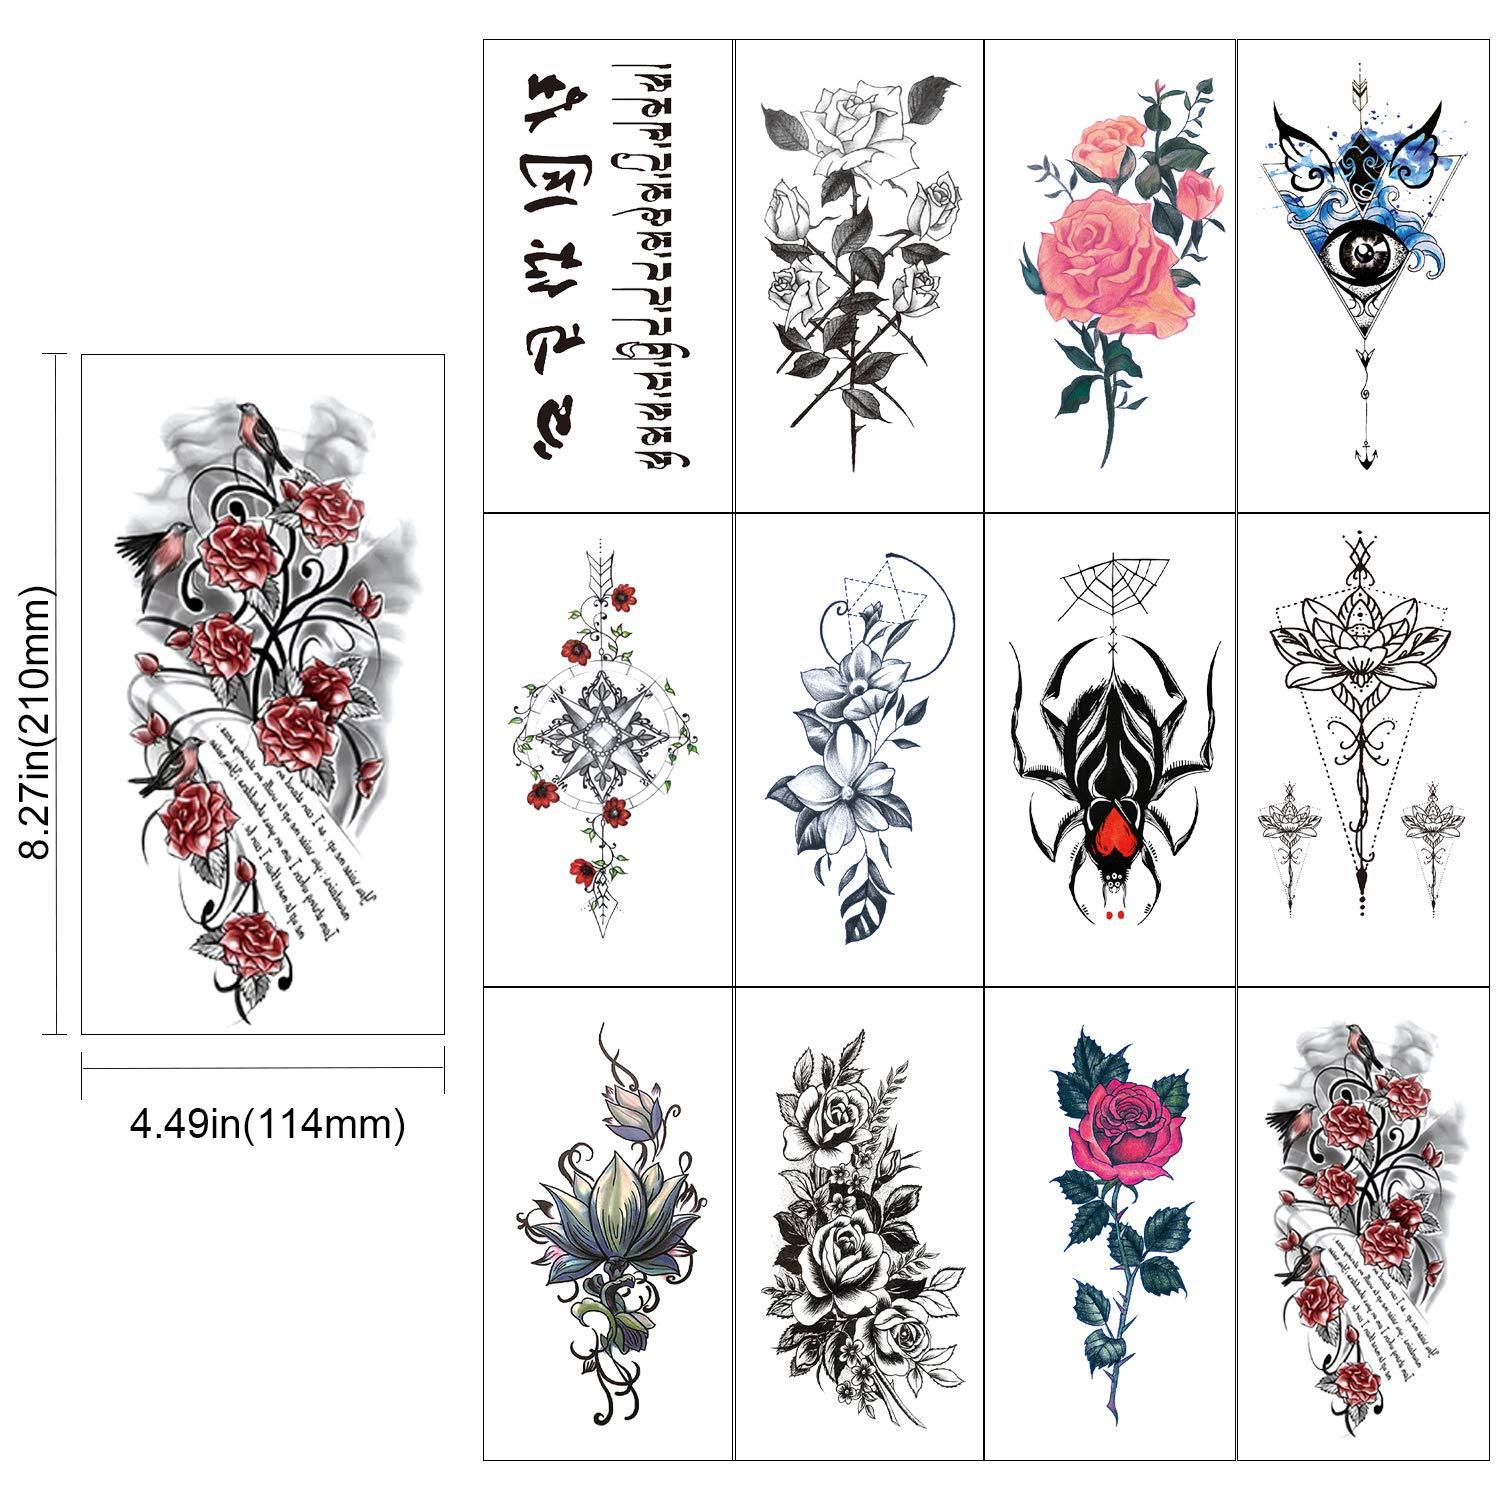 Large Waterproof Temporary Tattoos Body Sticker For Men And Women Colored  Drawing Designs Featuring Lion King, Snake, Chinese Dragon, Ganesha, Tiger,  And Human Body ArtL231 From Catherine006, $1.9 | DHgate.Com